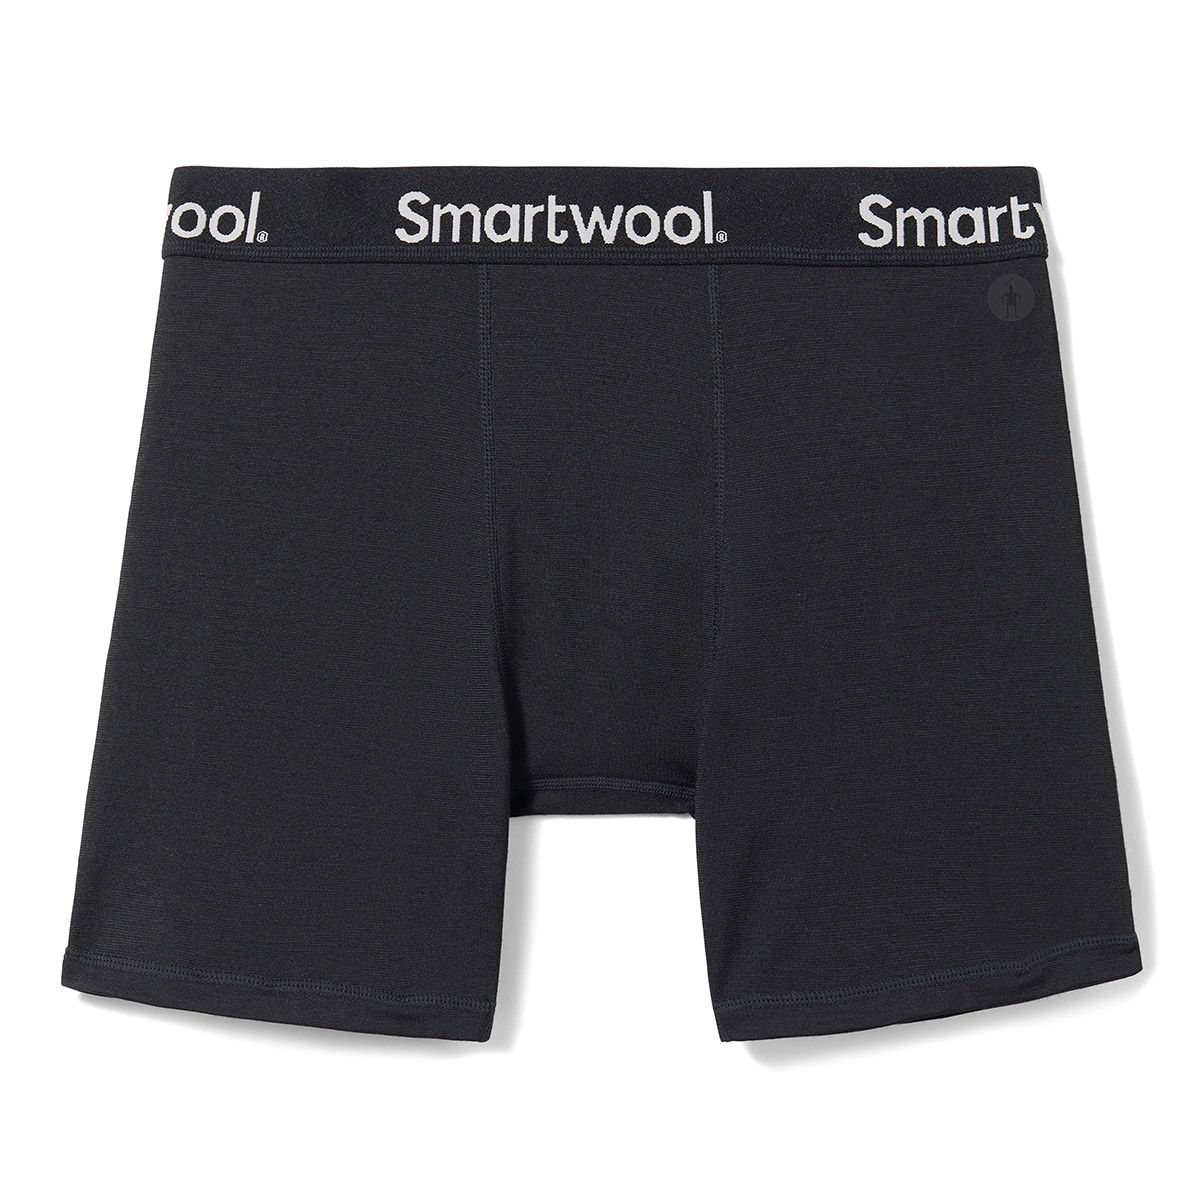 Thermoactive Boxer Shorts - Marwi B.V. Army Surplus